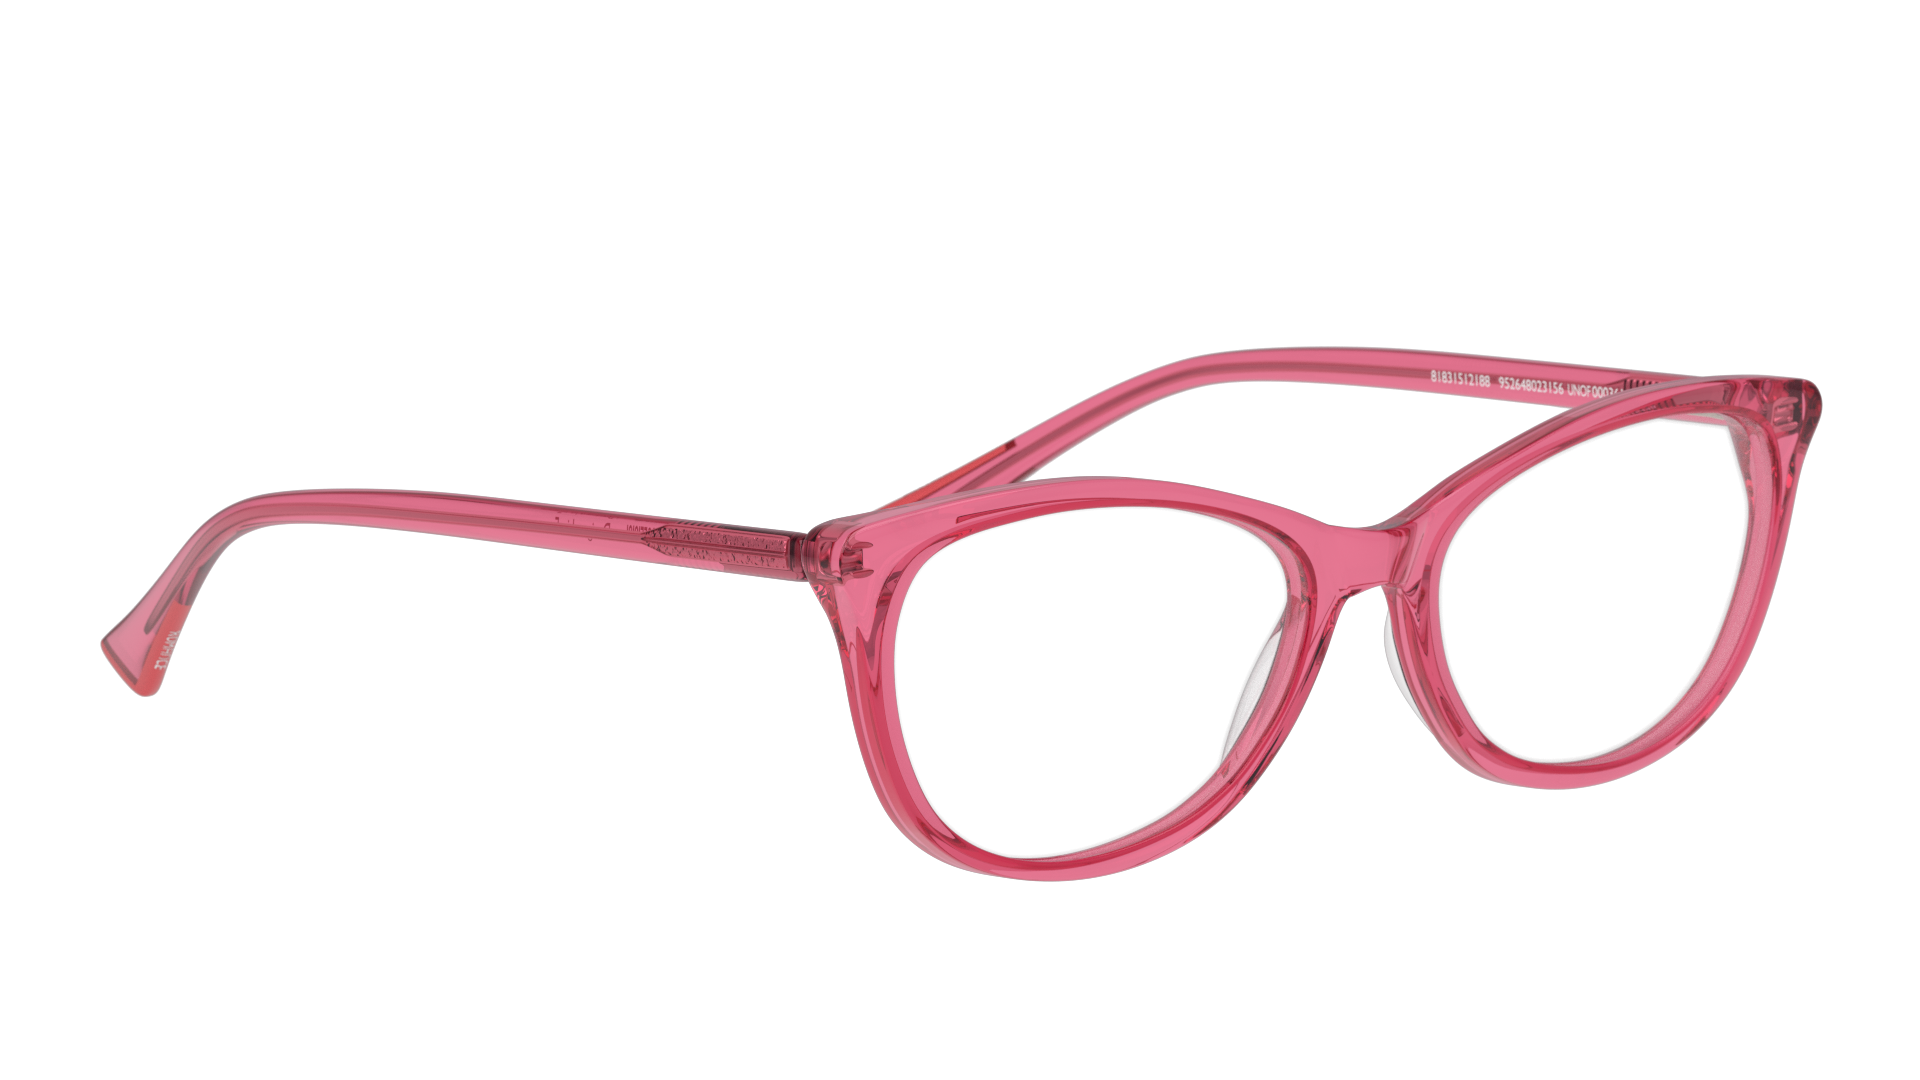 Angle_Right01 Unofficial UNOF0003 Glasses Transparent / Transparent, Pink